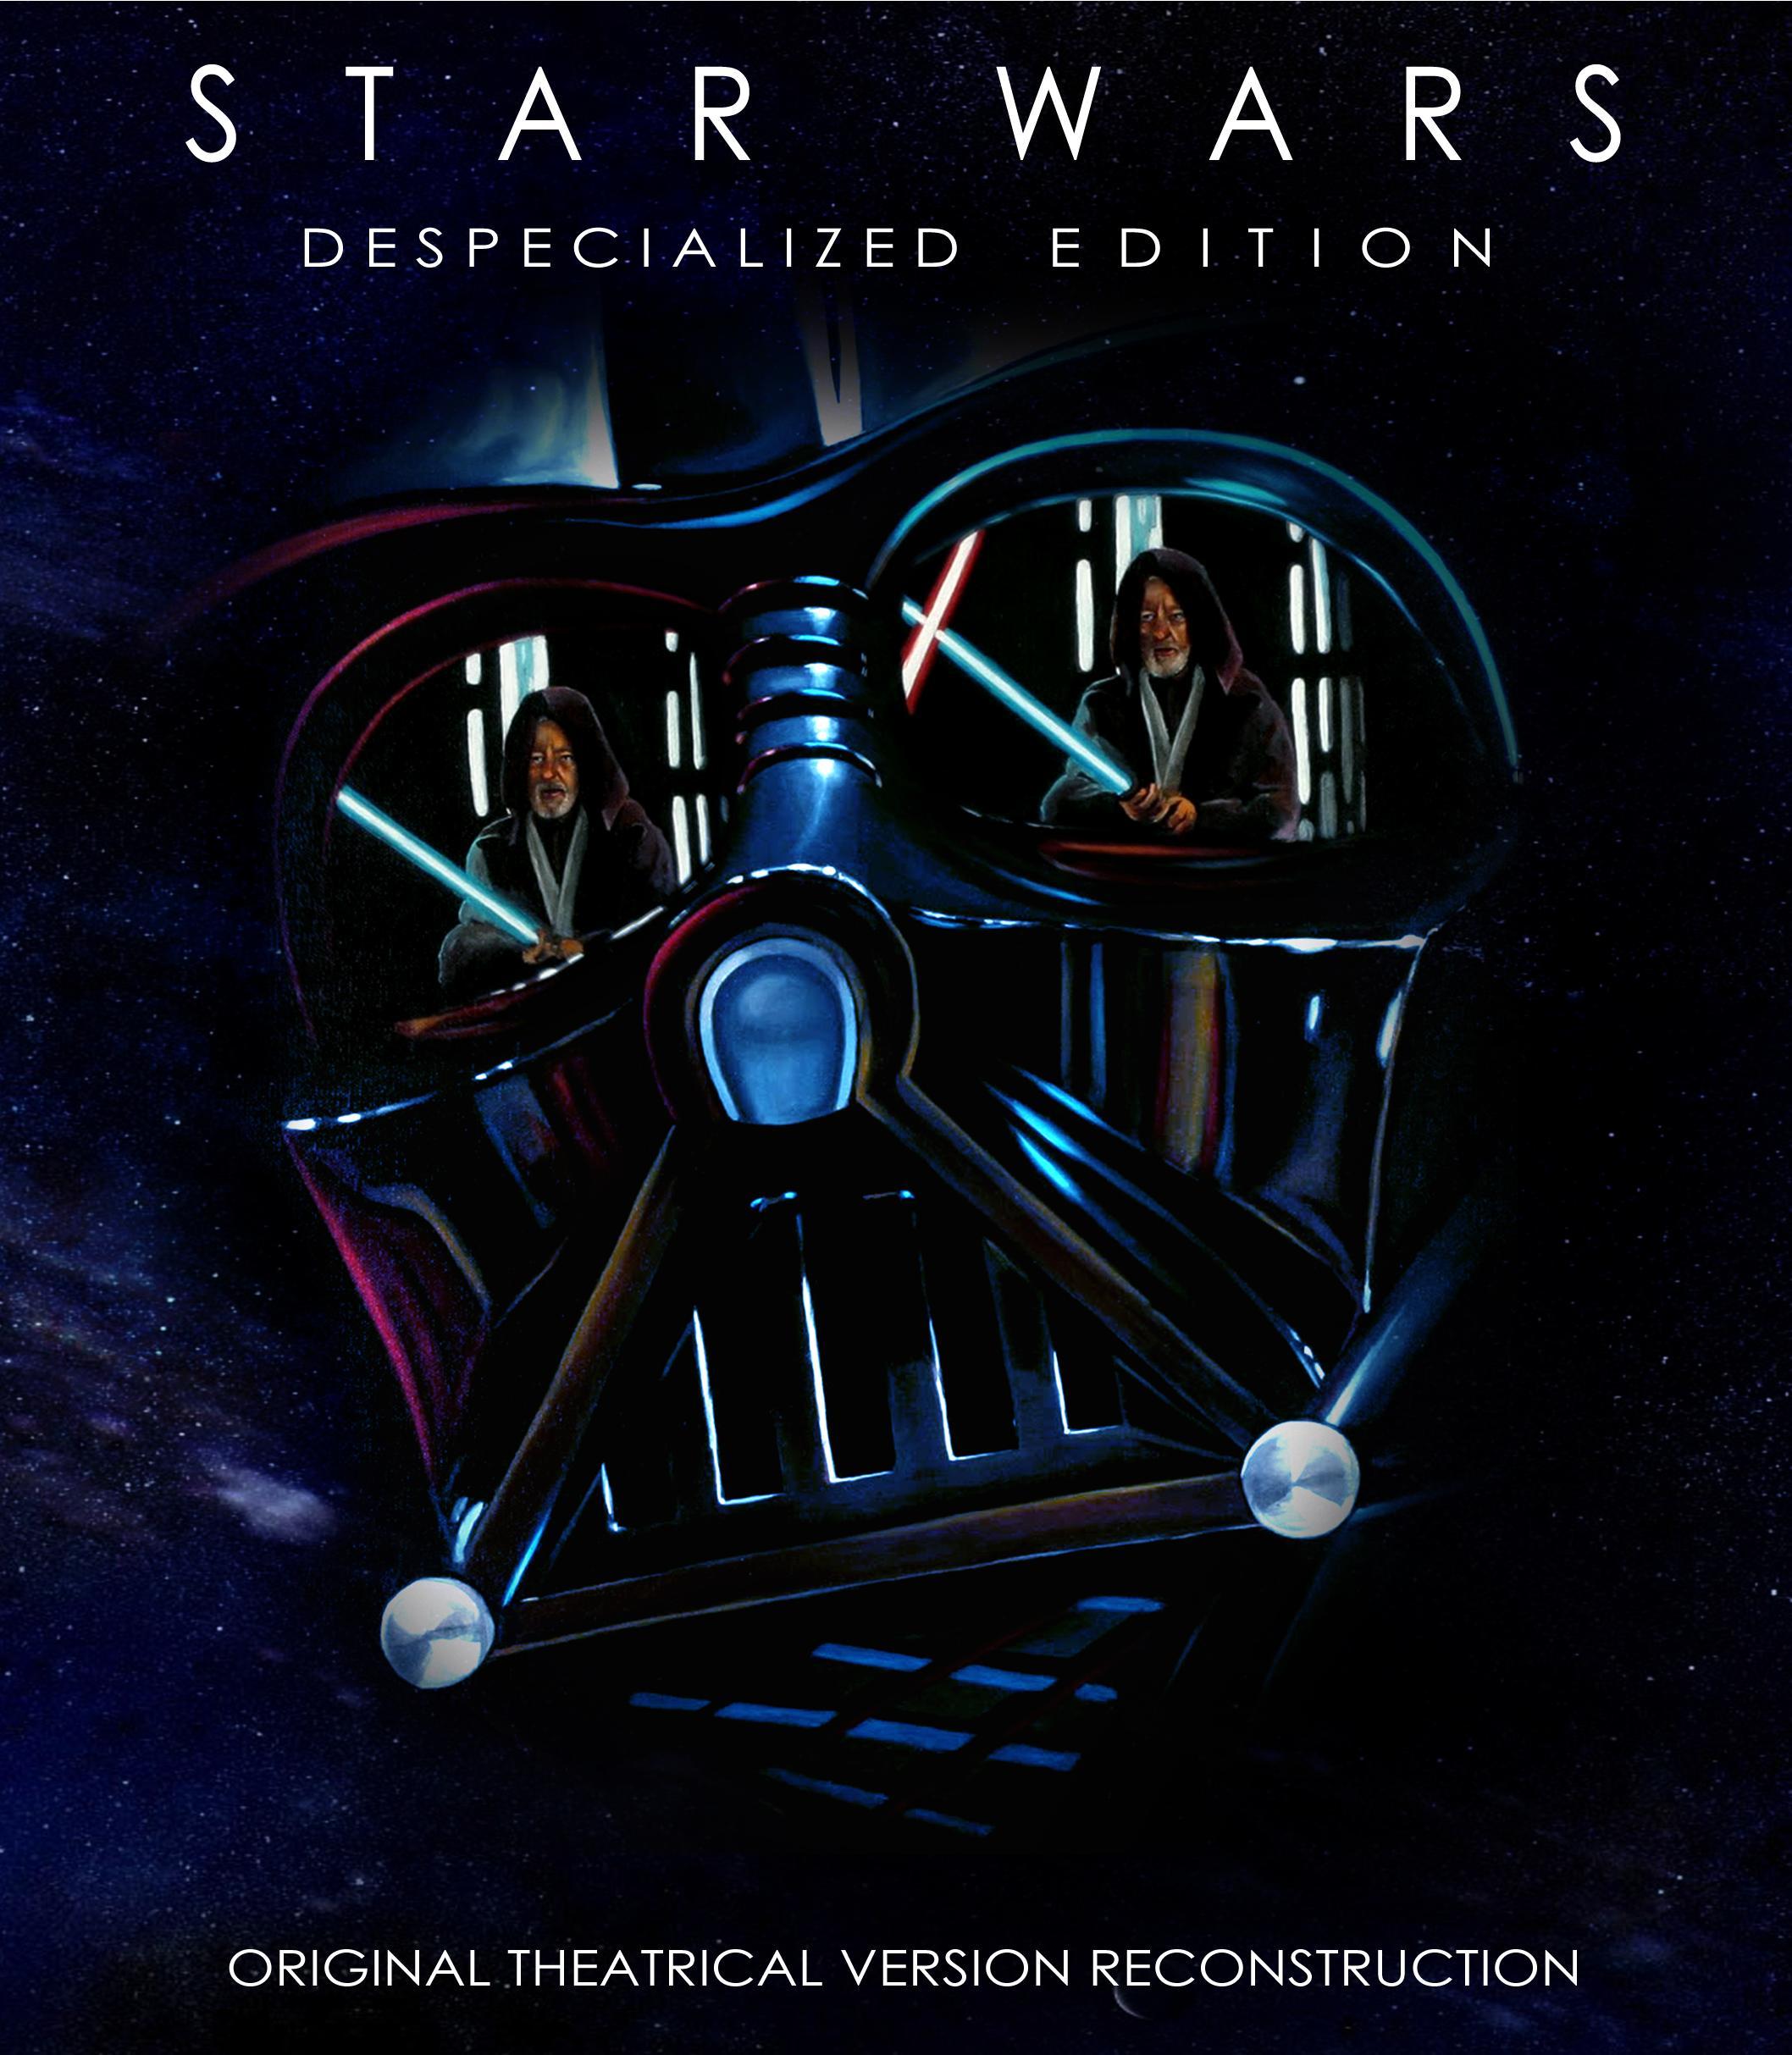 Star Wars - Despecialized Edition (Latino/Ingles) [720p]